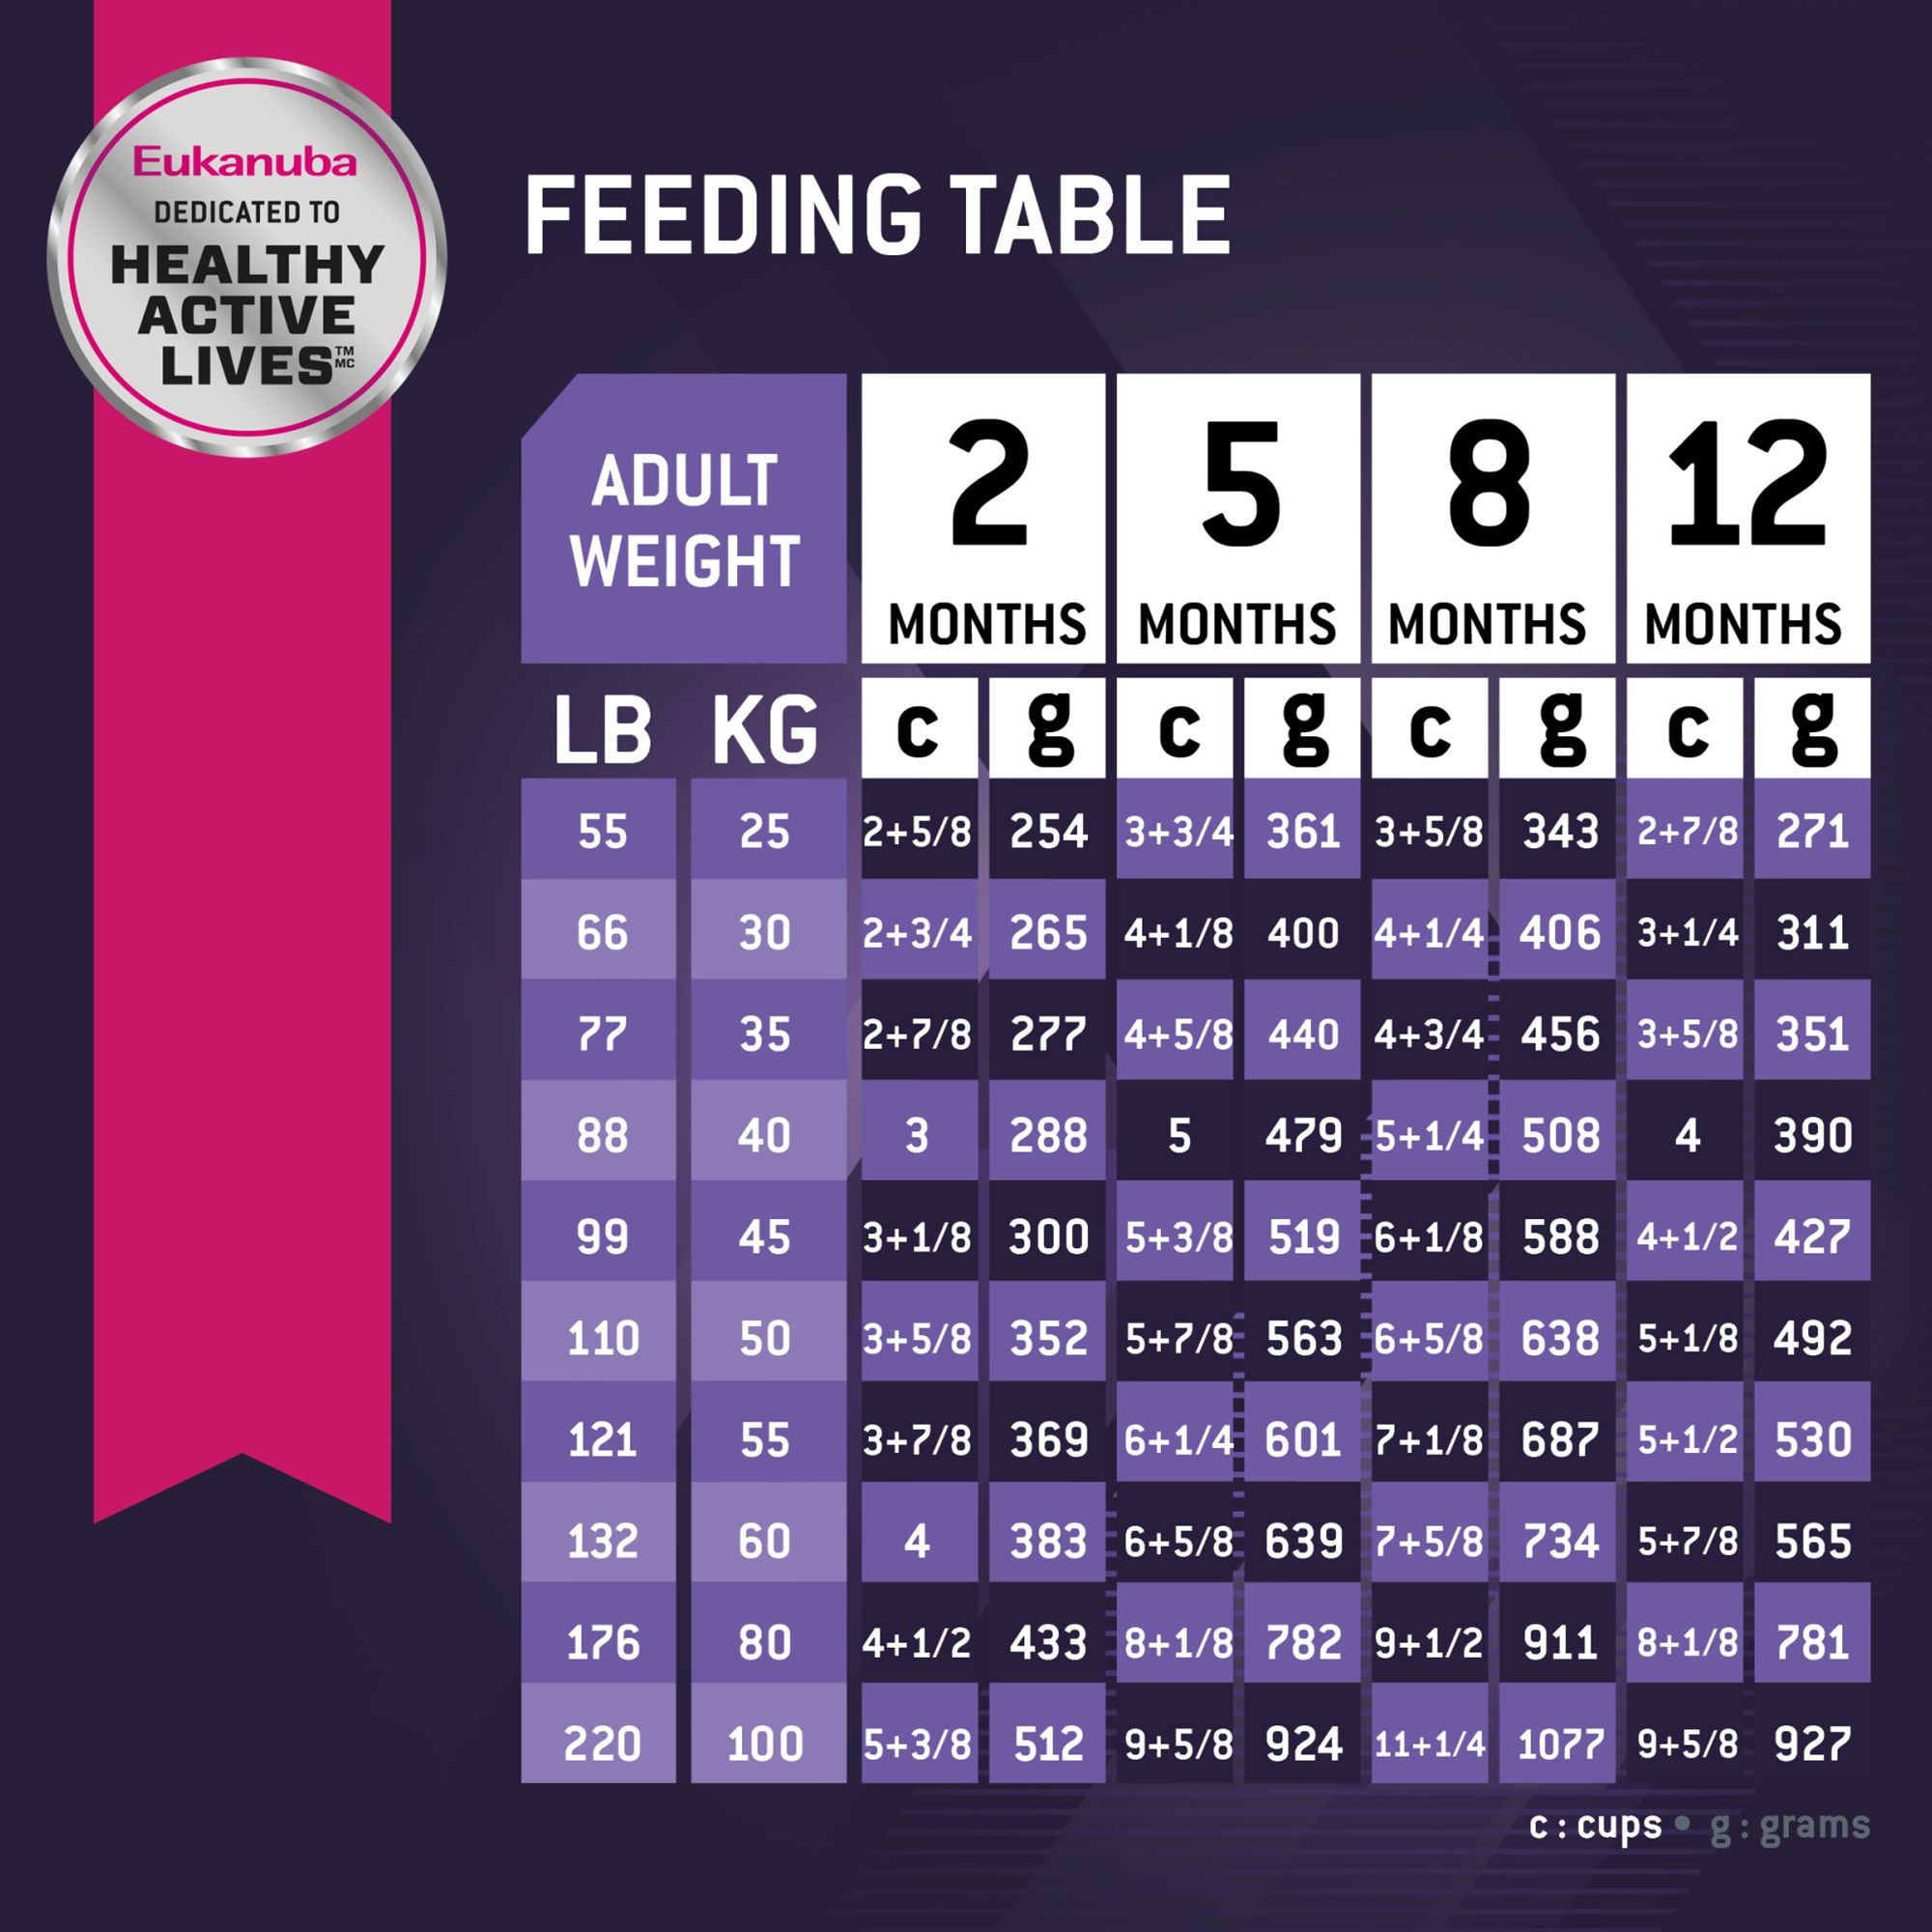 hill's science diet puppy food feeding chart